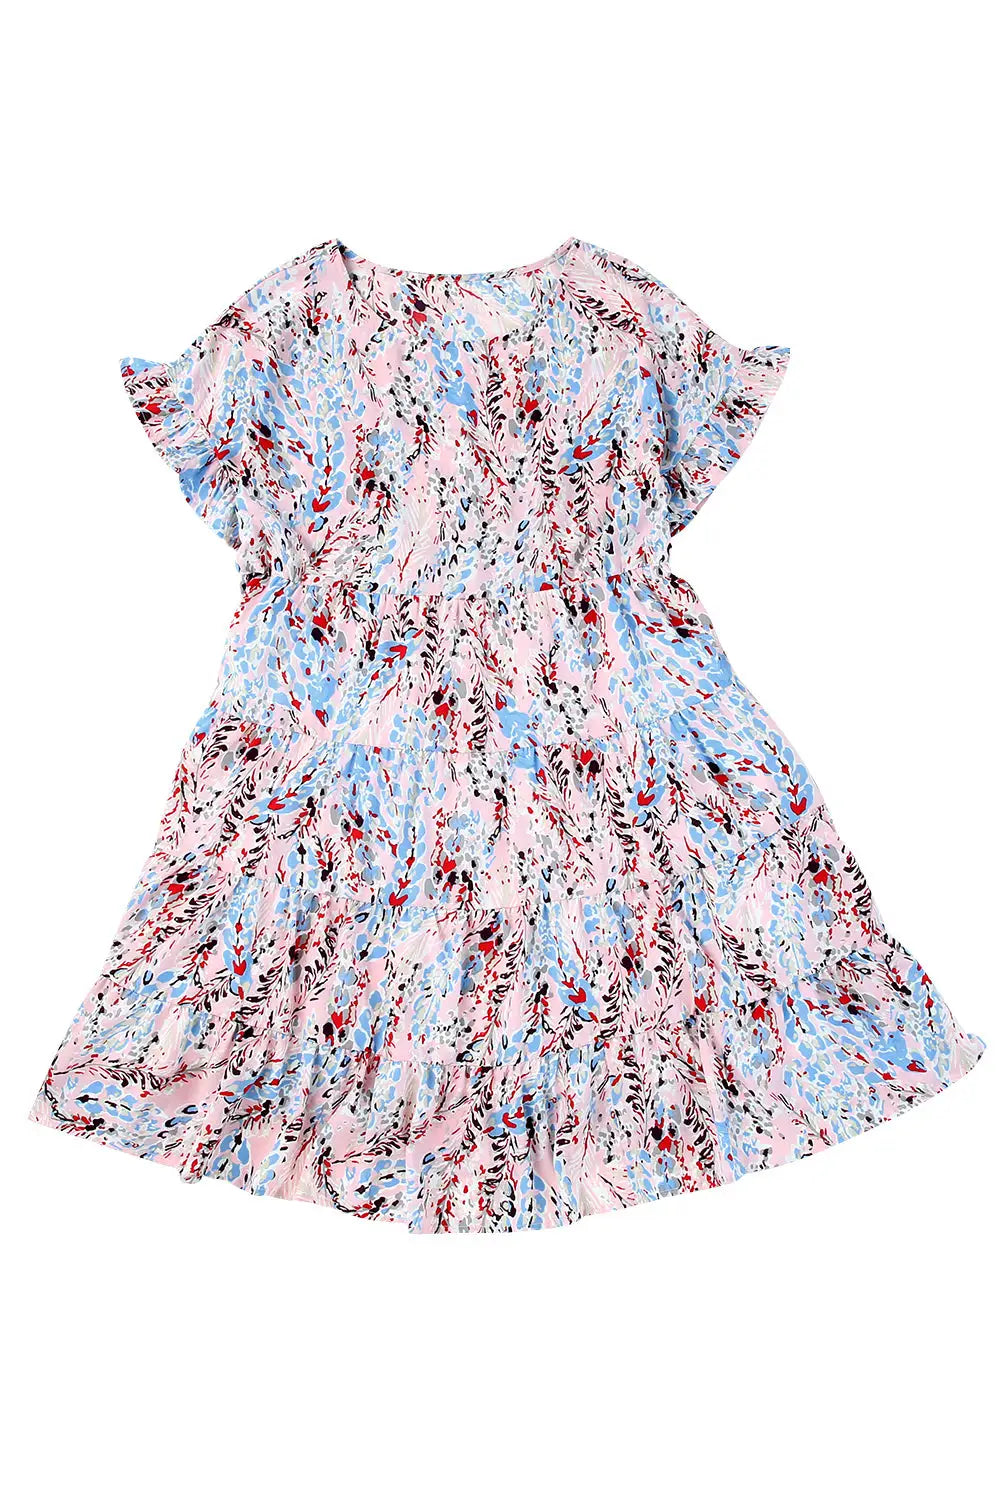 Pink short sleeves floral print tiered ruffled dress - dresses